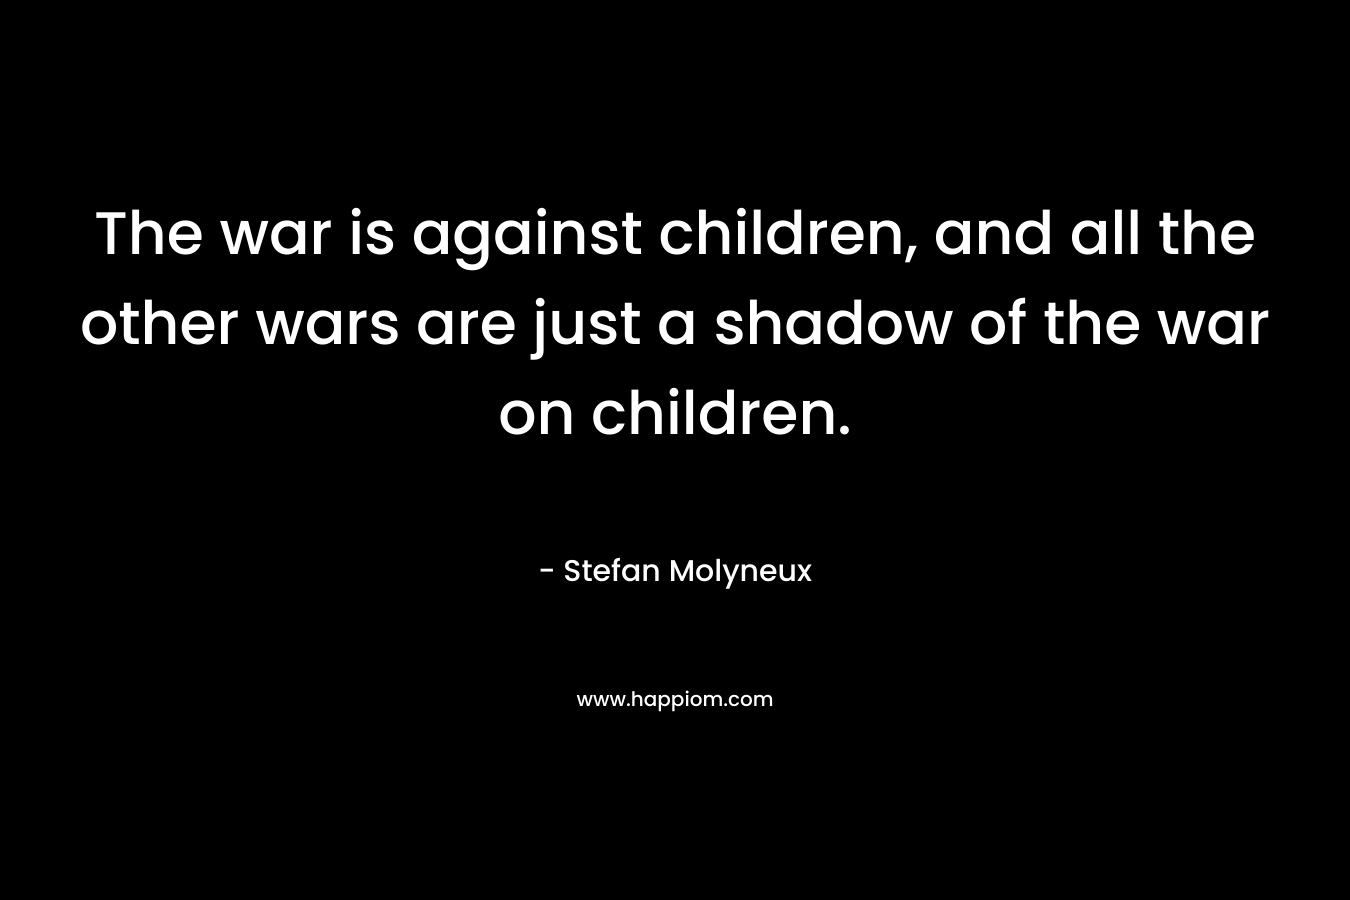 The war is against children, and all the other wars are just a shadow of the war on children. – Stefan Molyneux